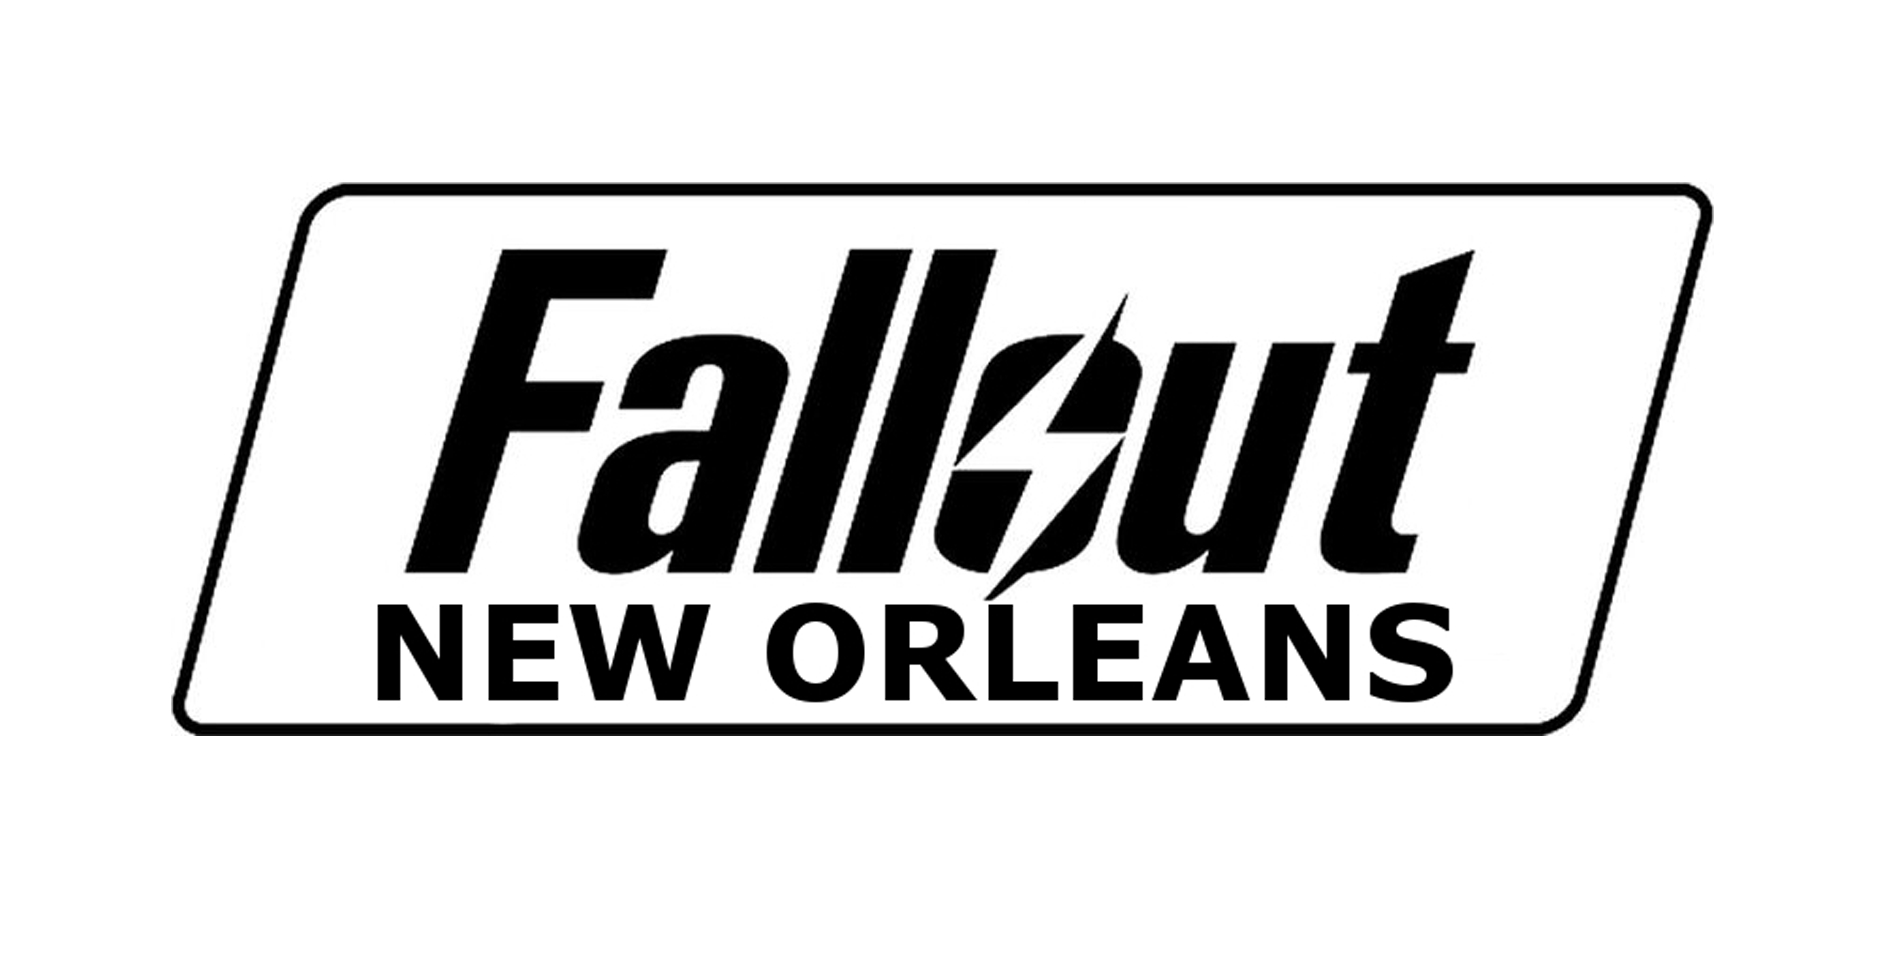 Fallout New Orleans